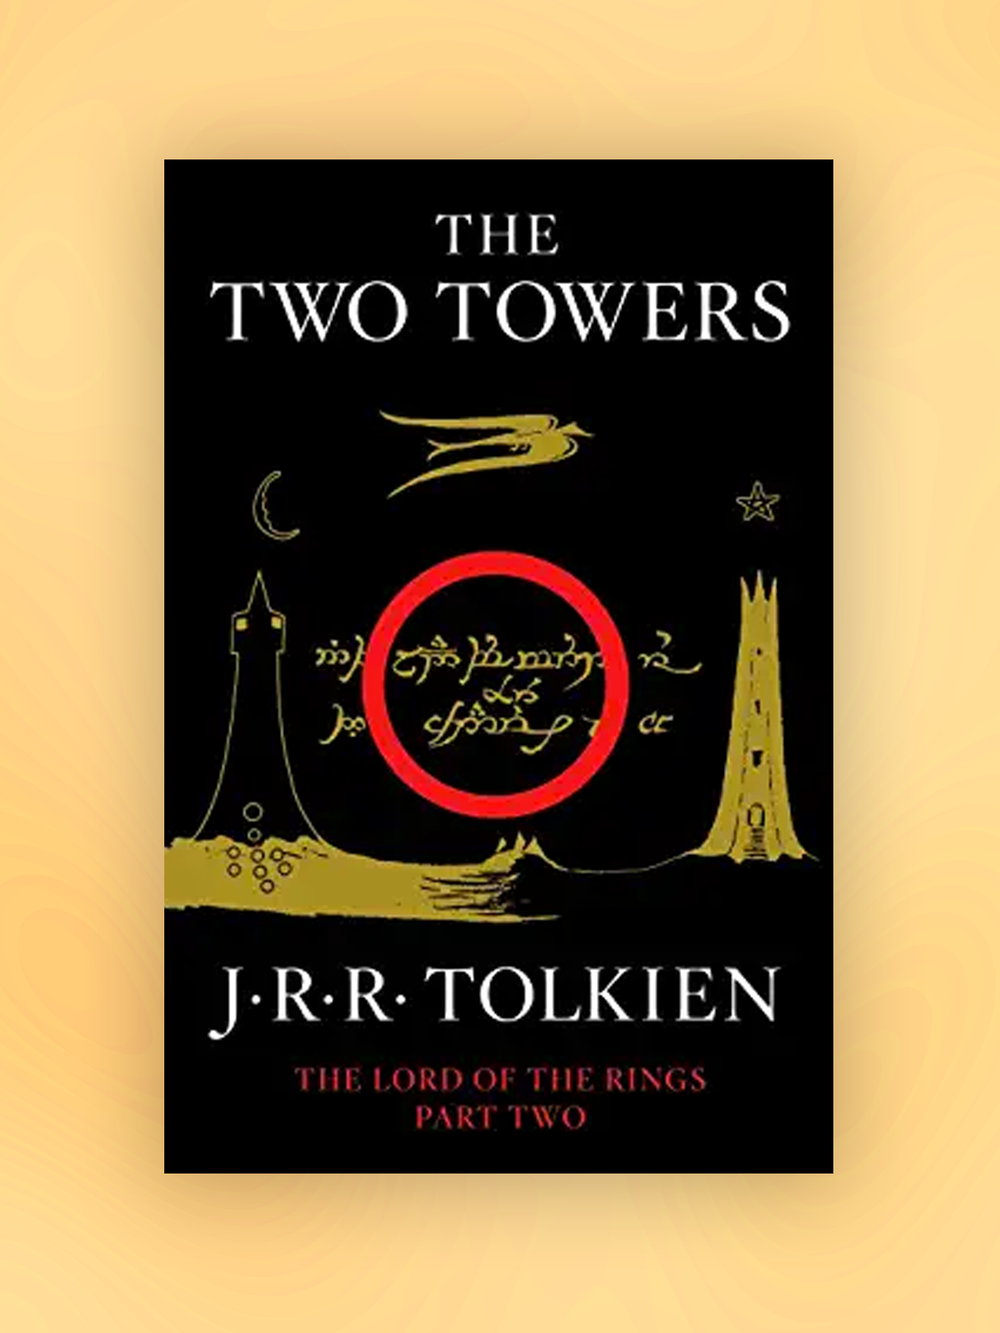 The Lord of the Rings: The Two Towers Review